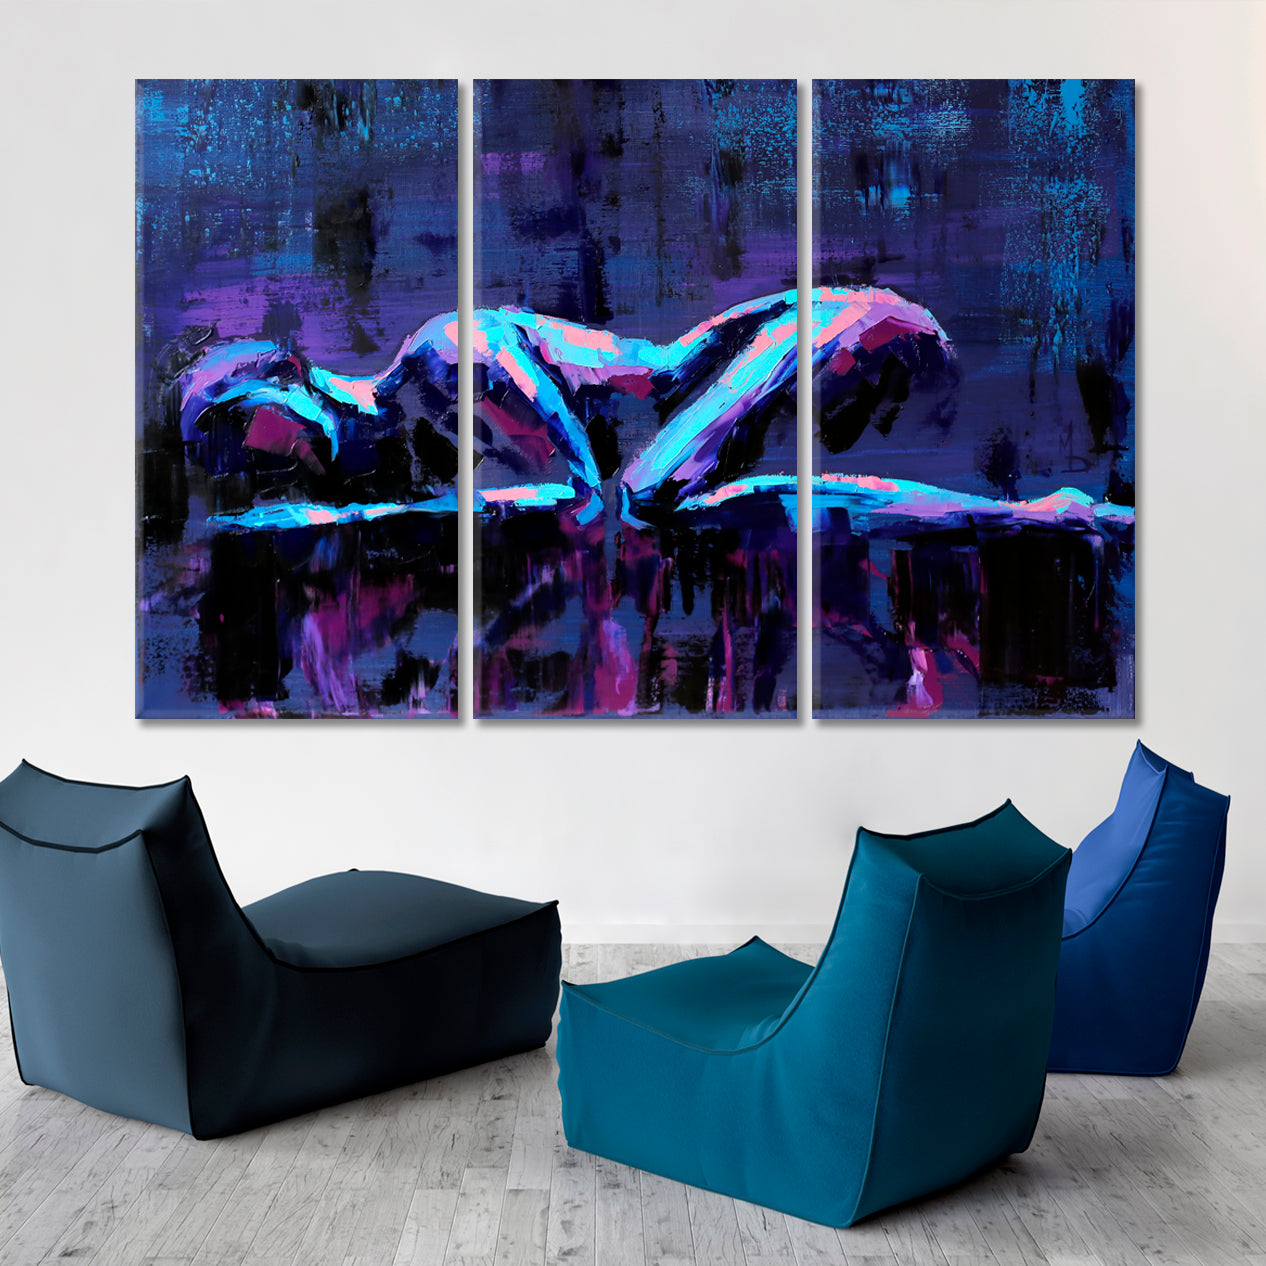 MOUNTAINS Lying Girl Body Shape Conceptual Abstract Painting Contemporary Art Artesty 3 panels 36" x 24" 